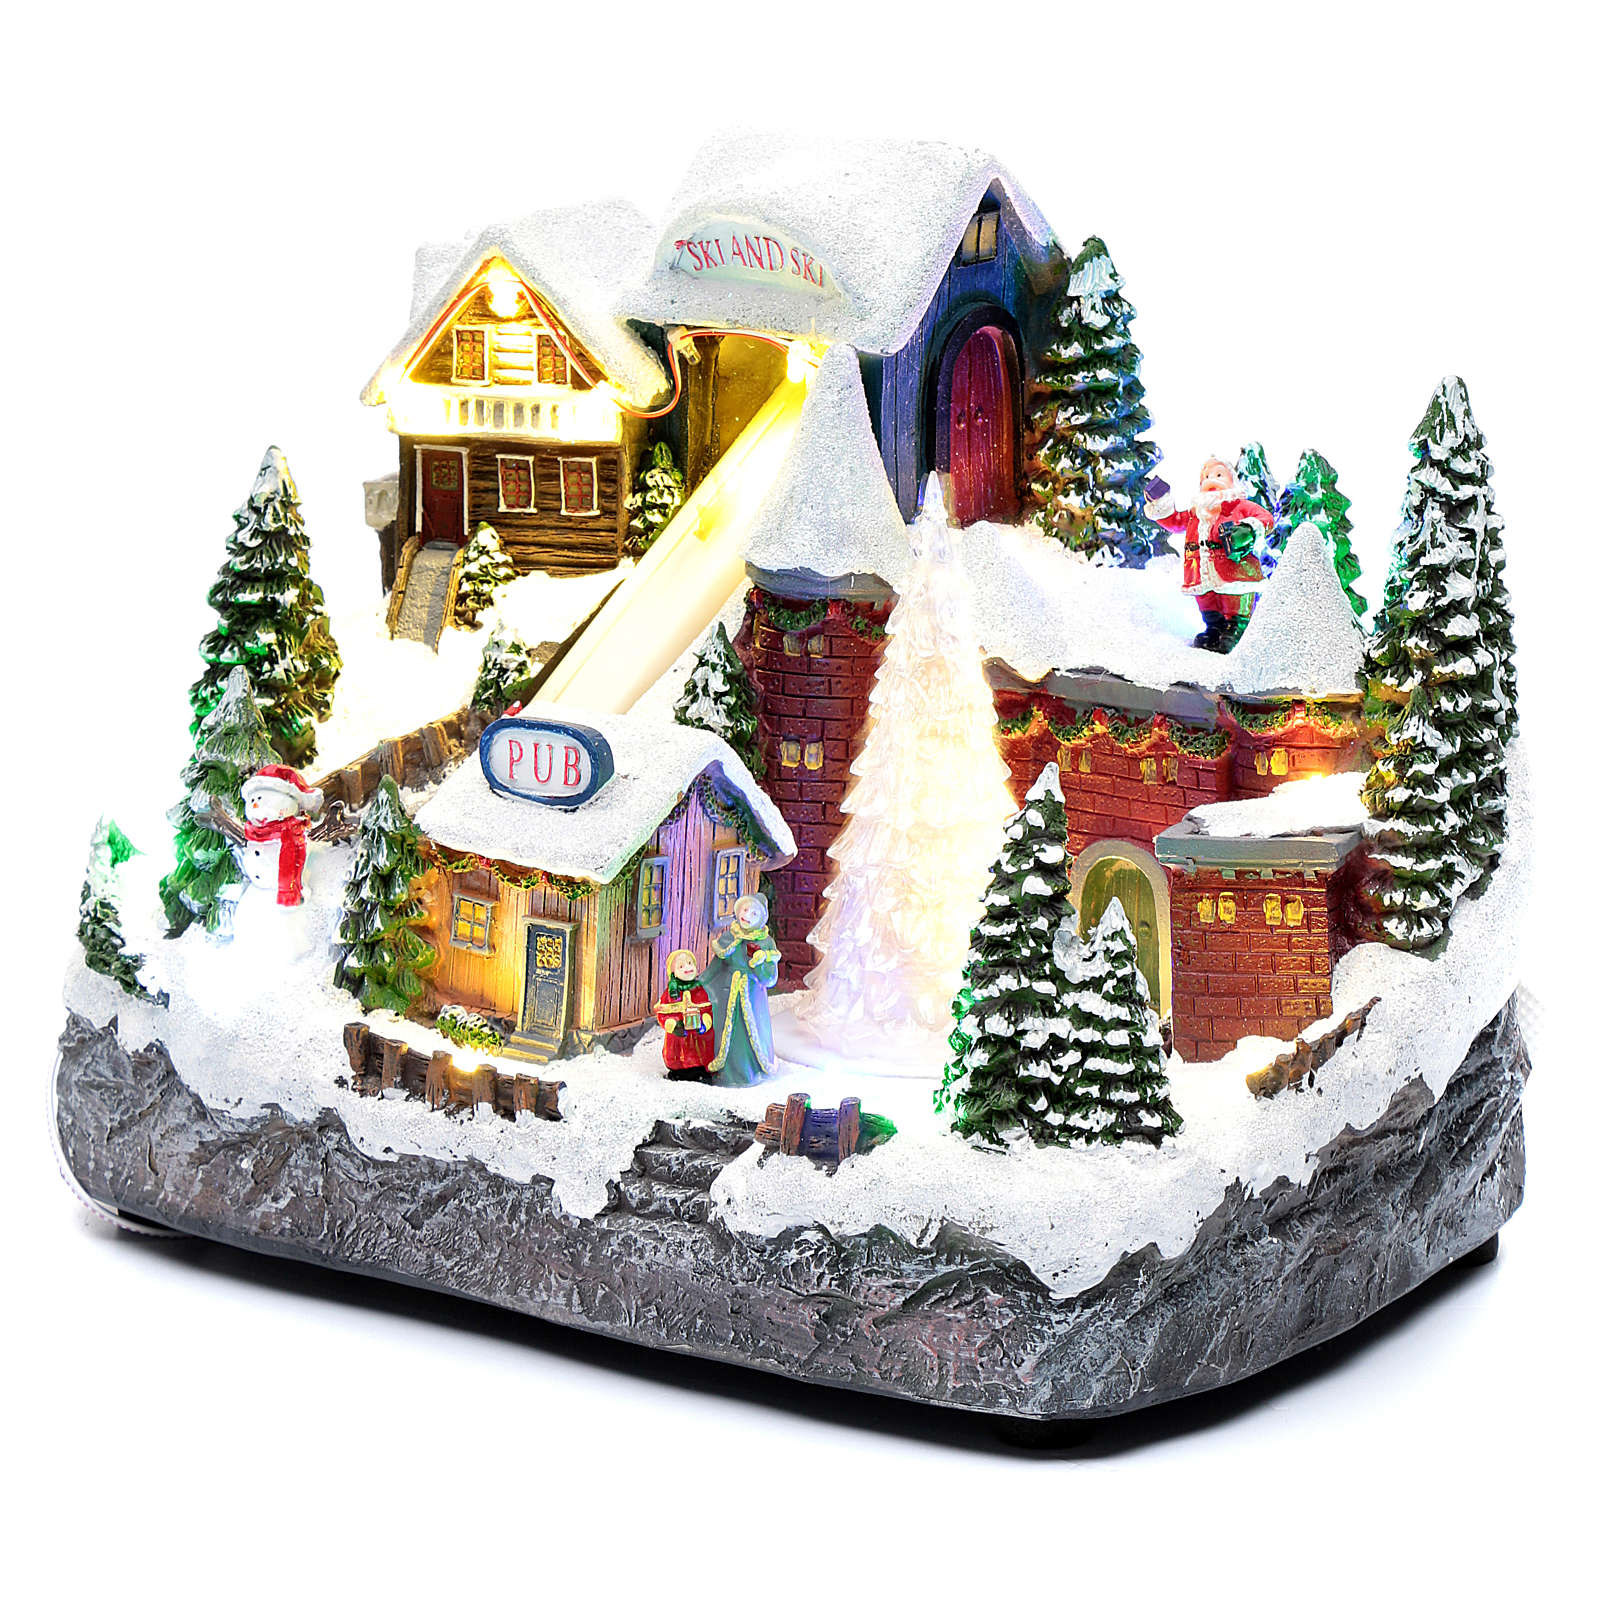 Moving Christmas ski slope with tree 25x30x15 cm | online sales on ...